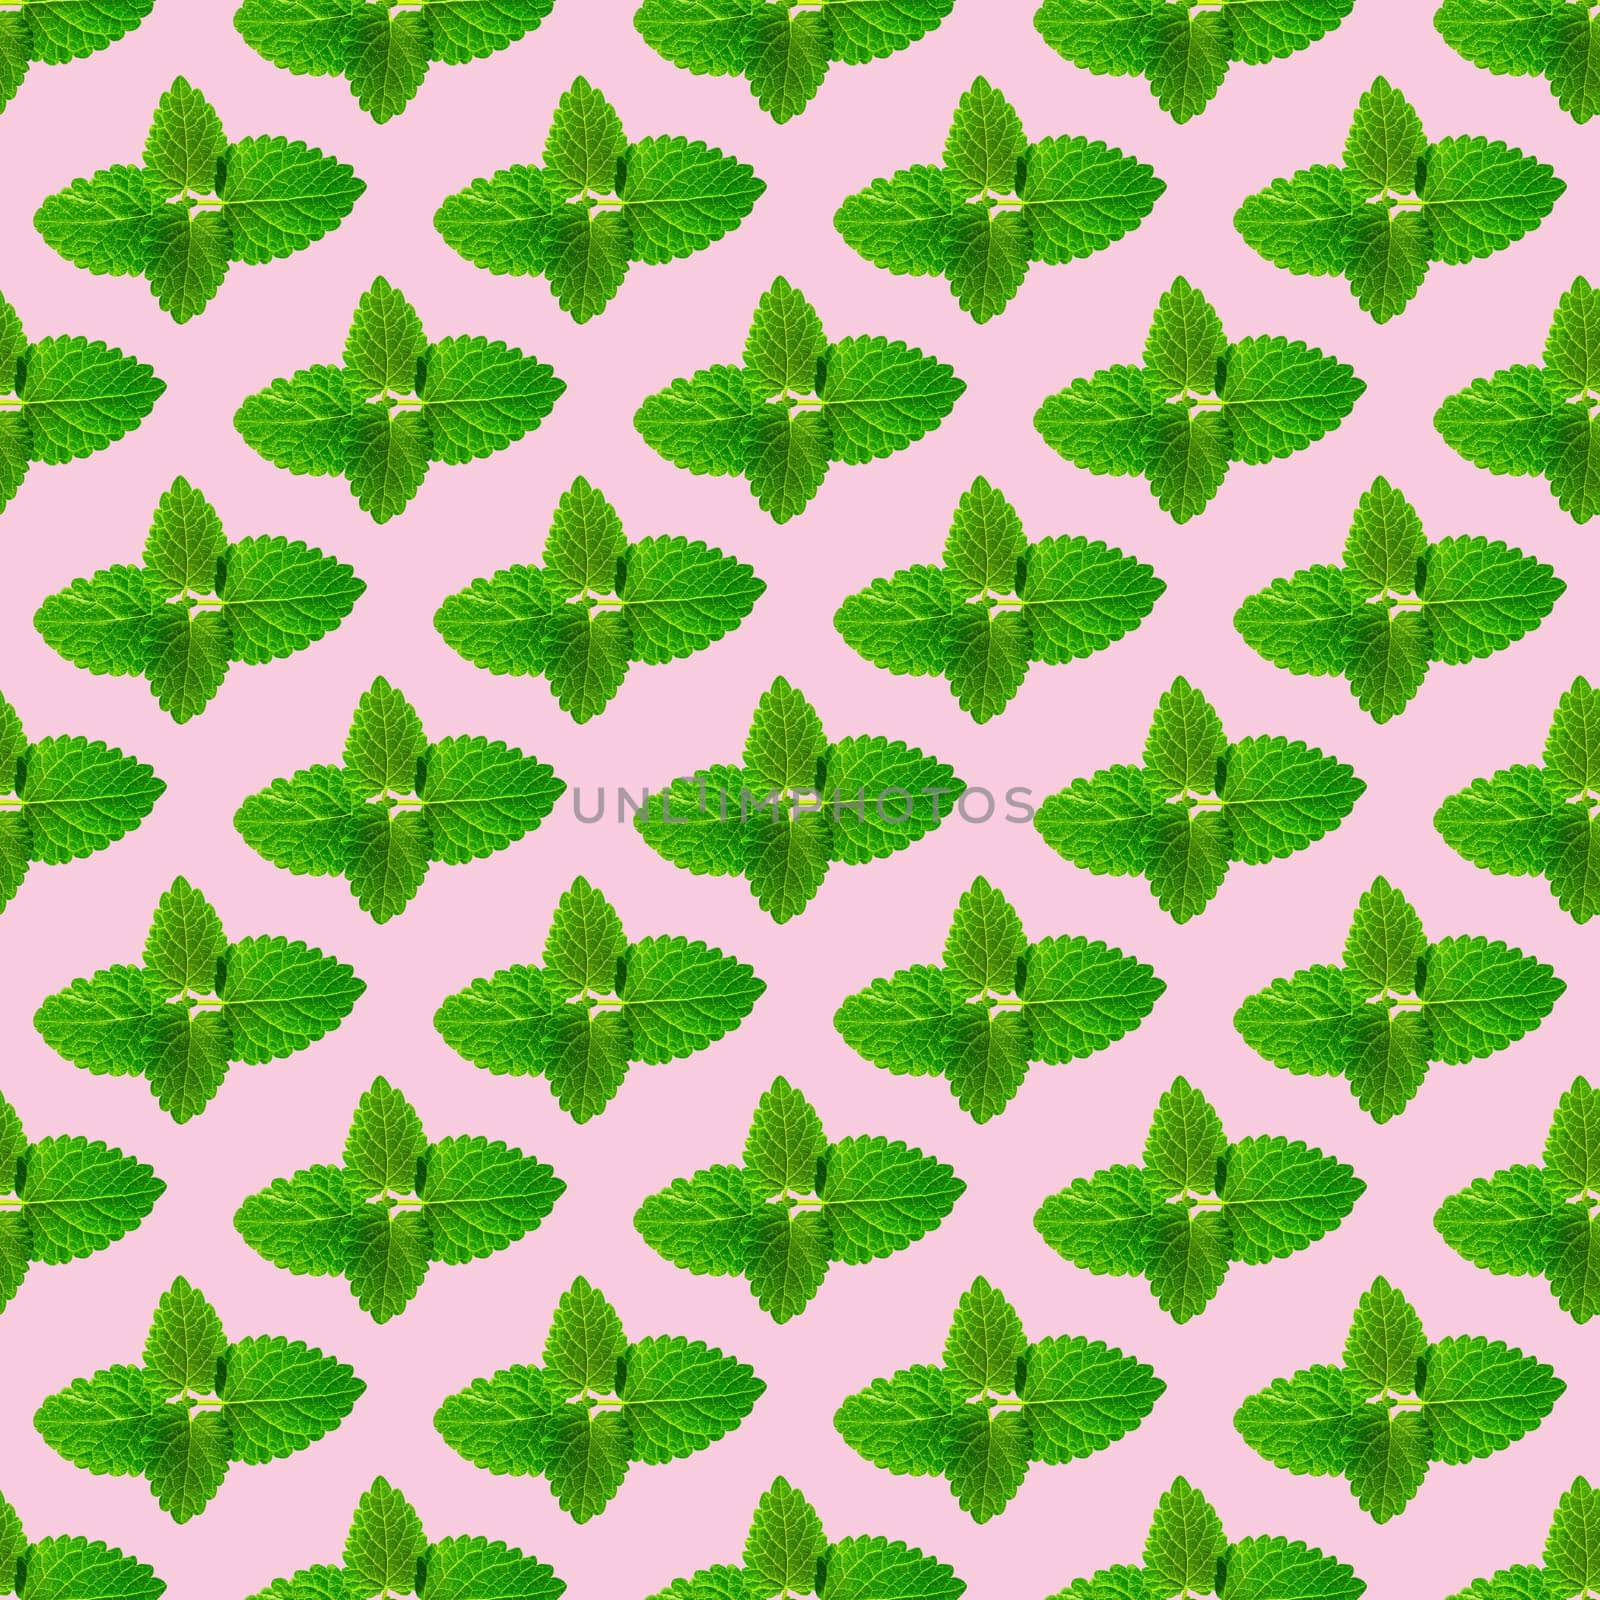 Seamless pattern of fresh mint leaves on pink background for packaging design. peppermint abstract background.